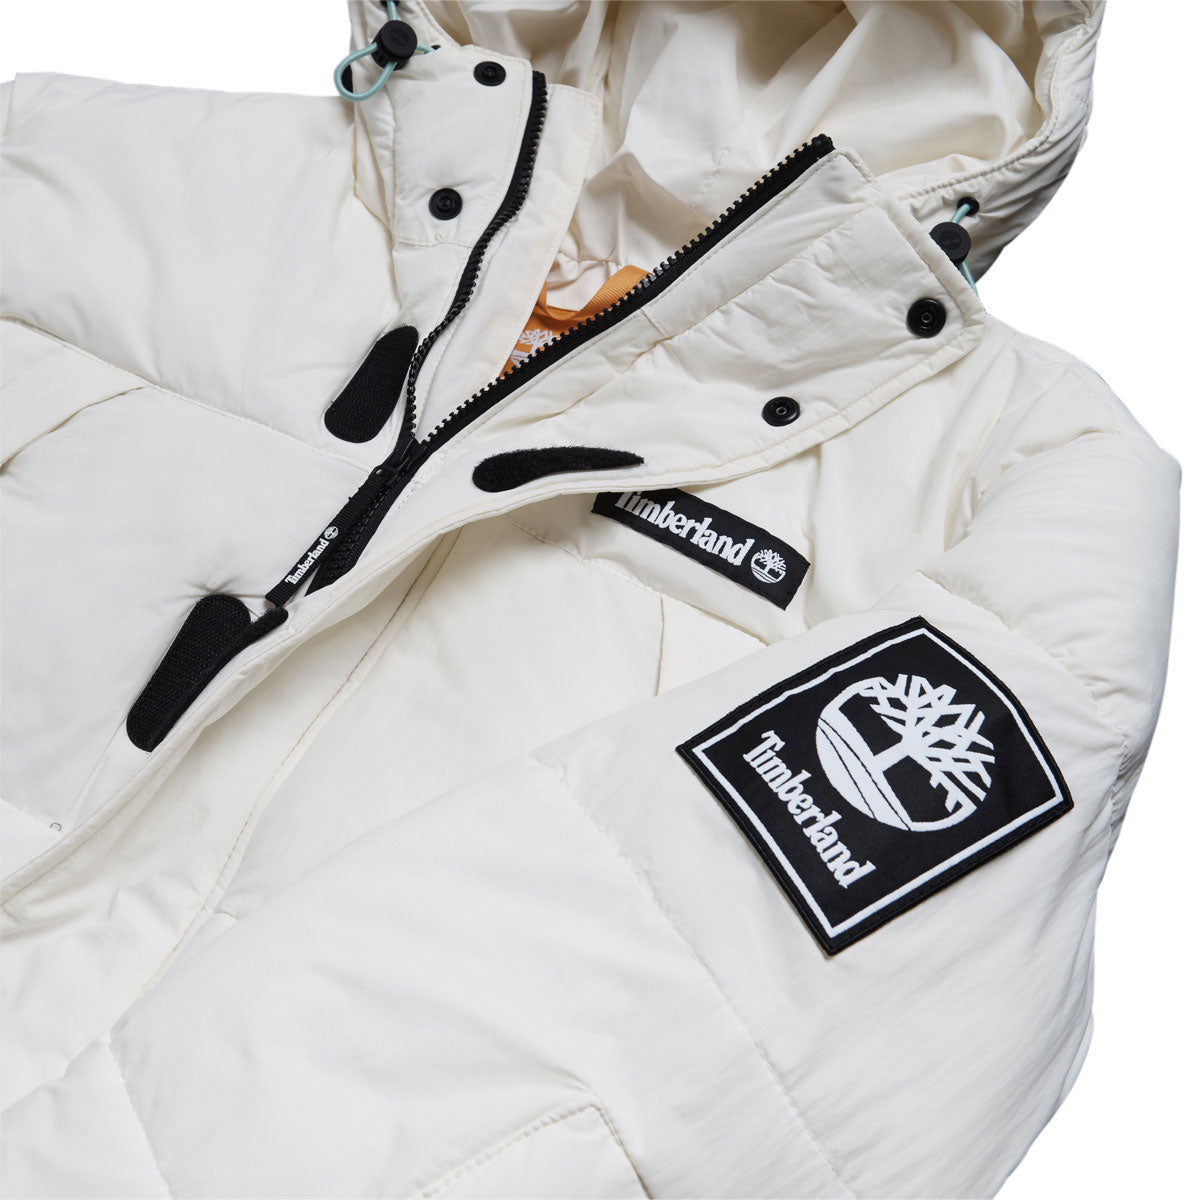 Timberland DWR Outdoor Archive Puffer Jacket - Solitary Star image 4